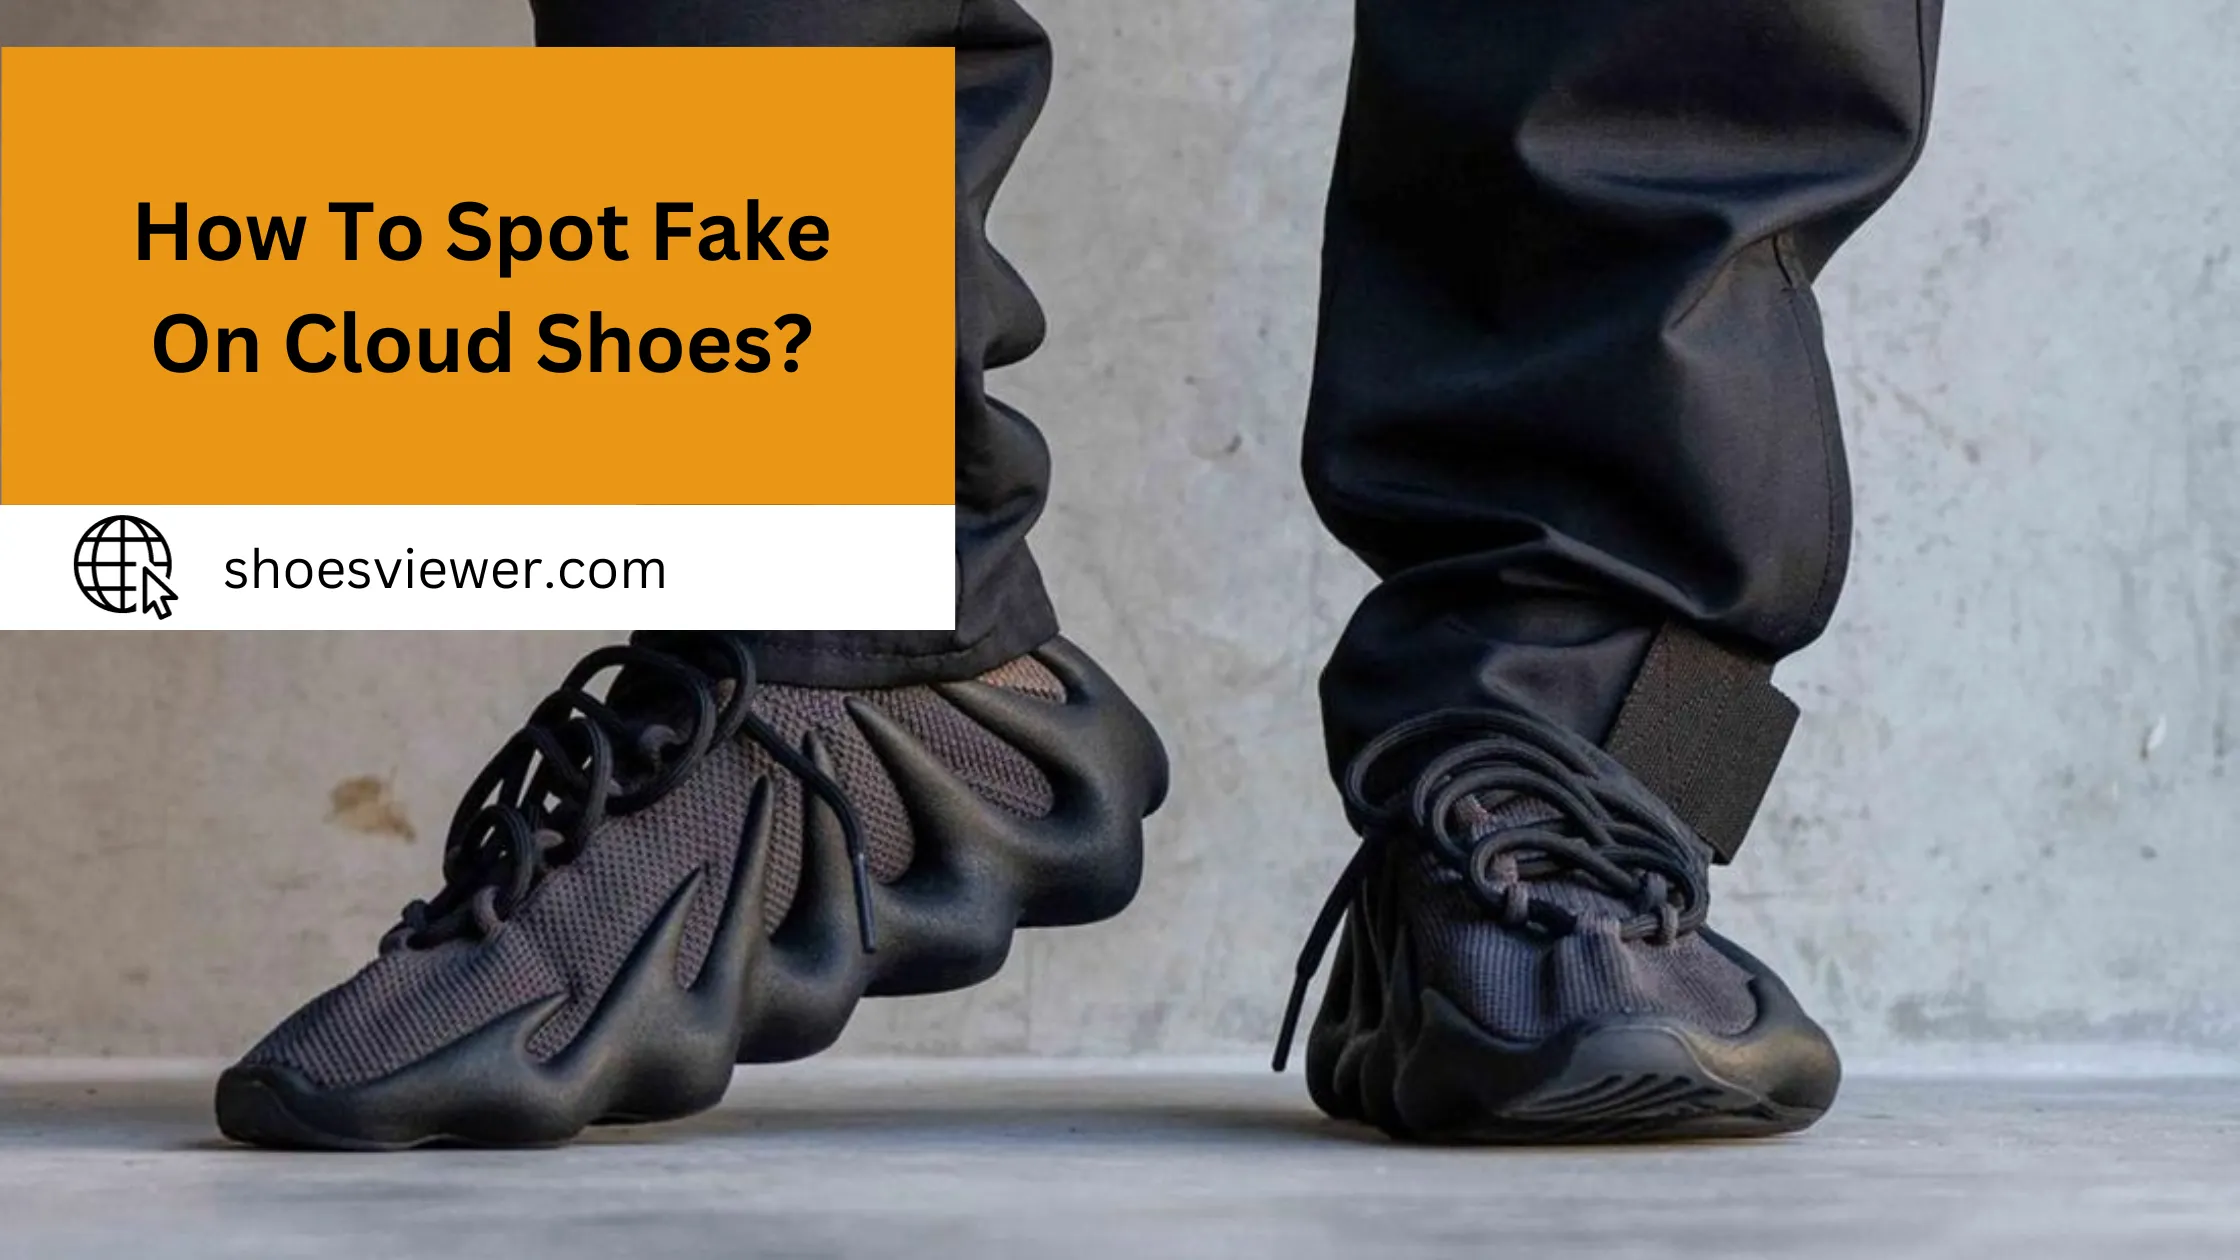 How To Spot Fake On Cloud Shoes? Complete Guide